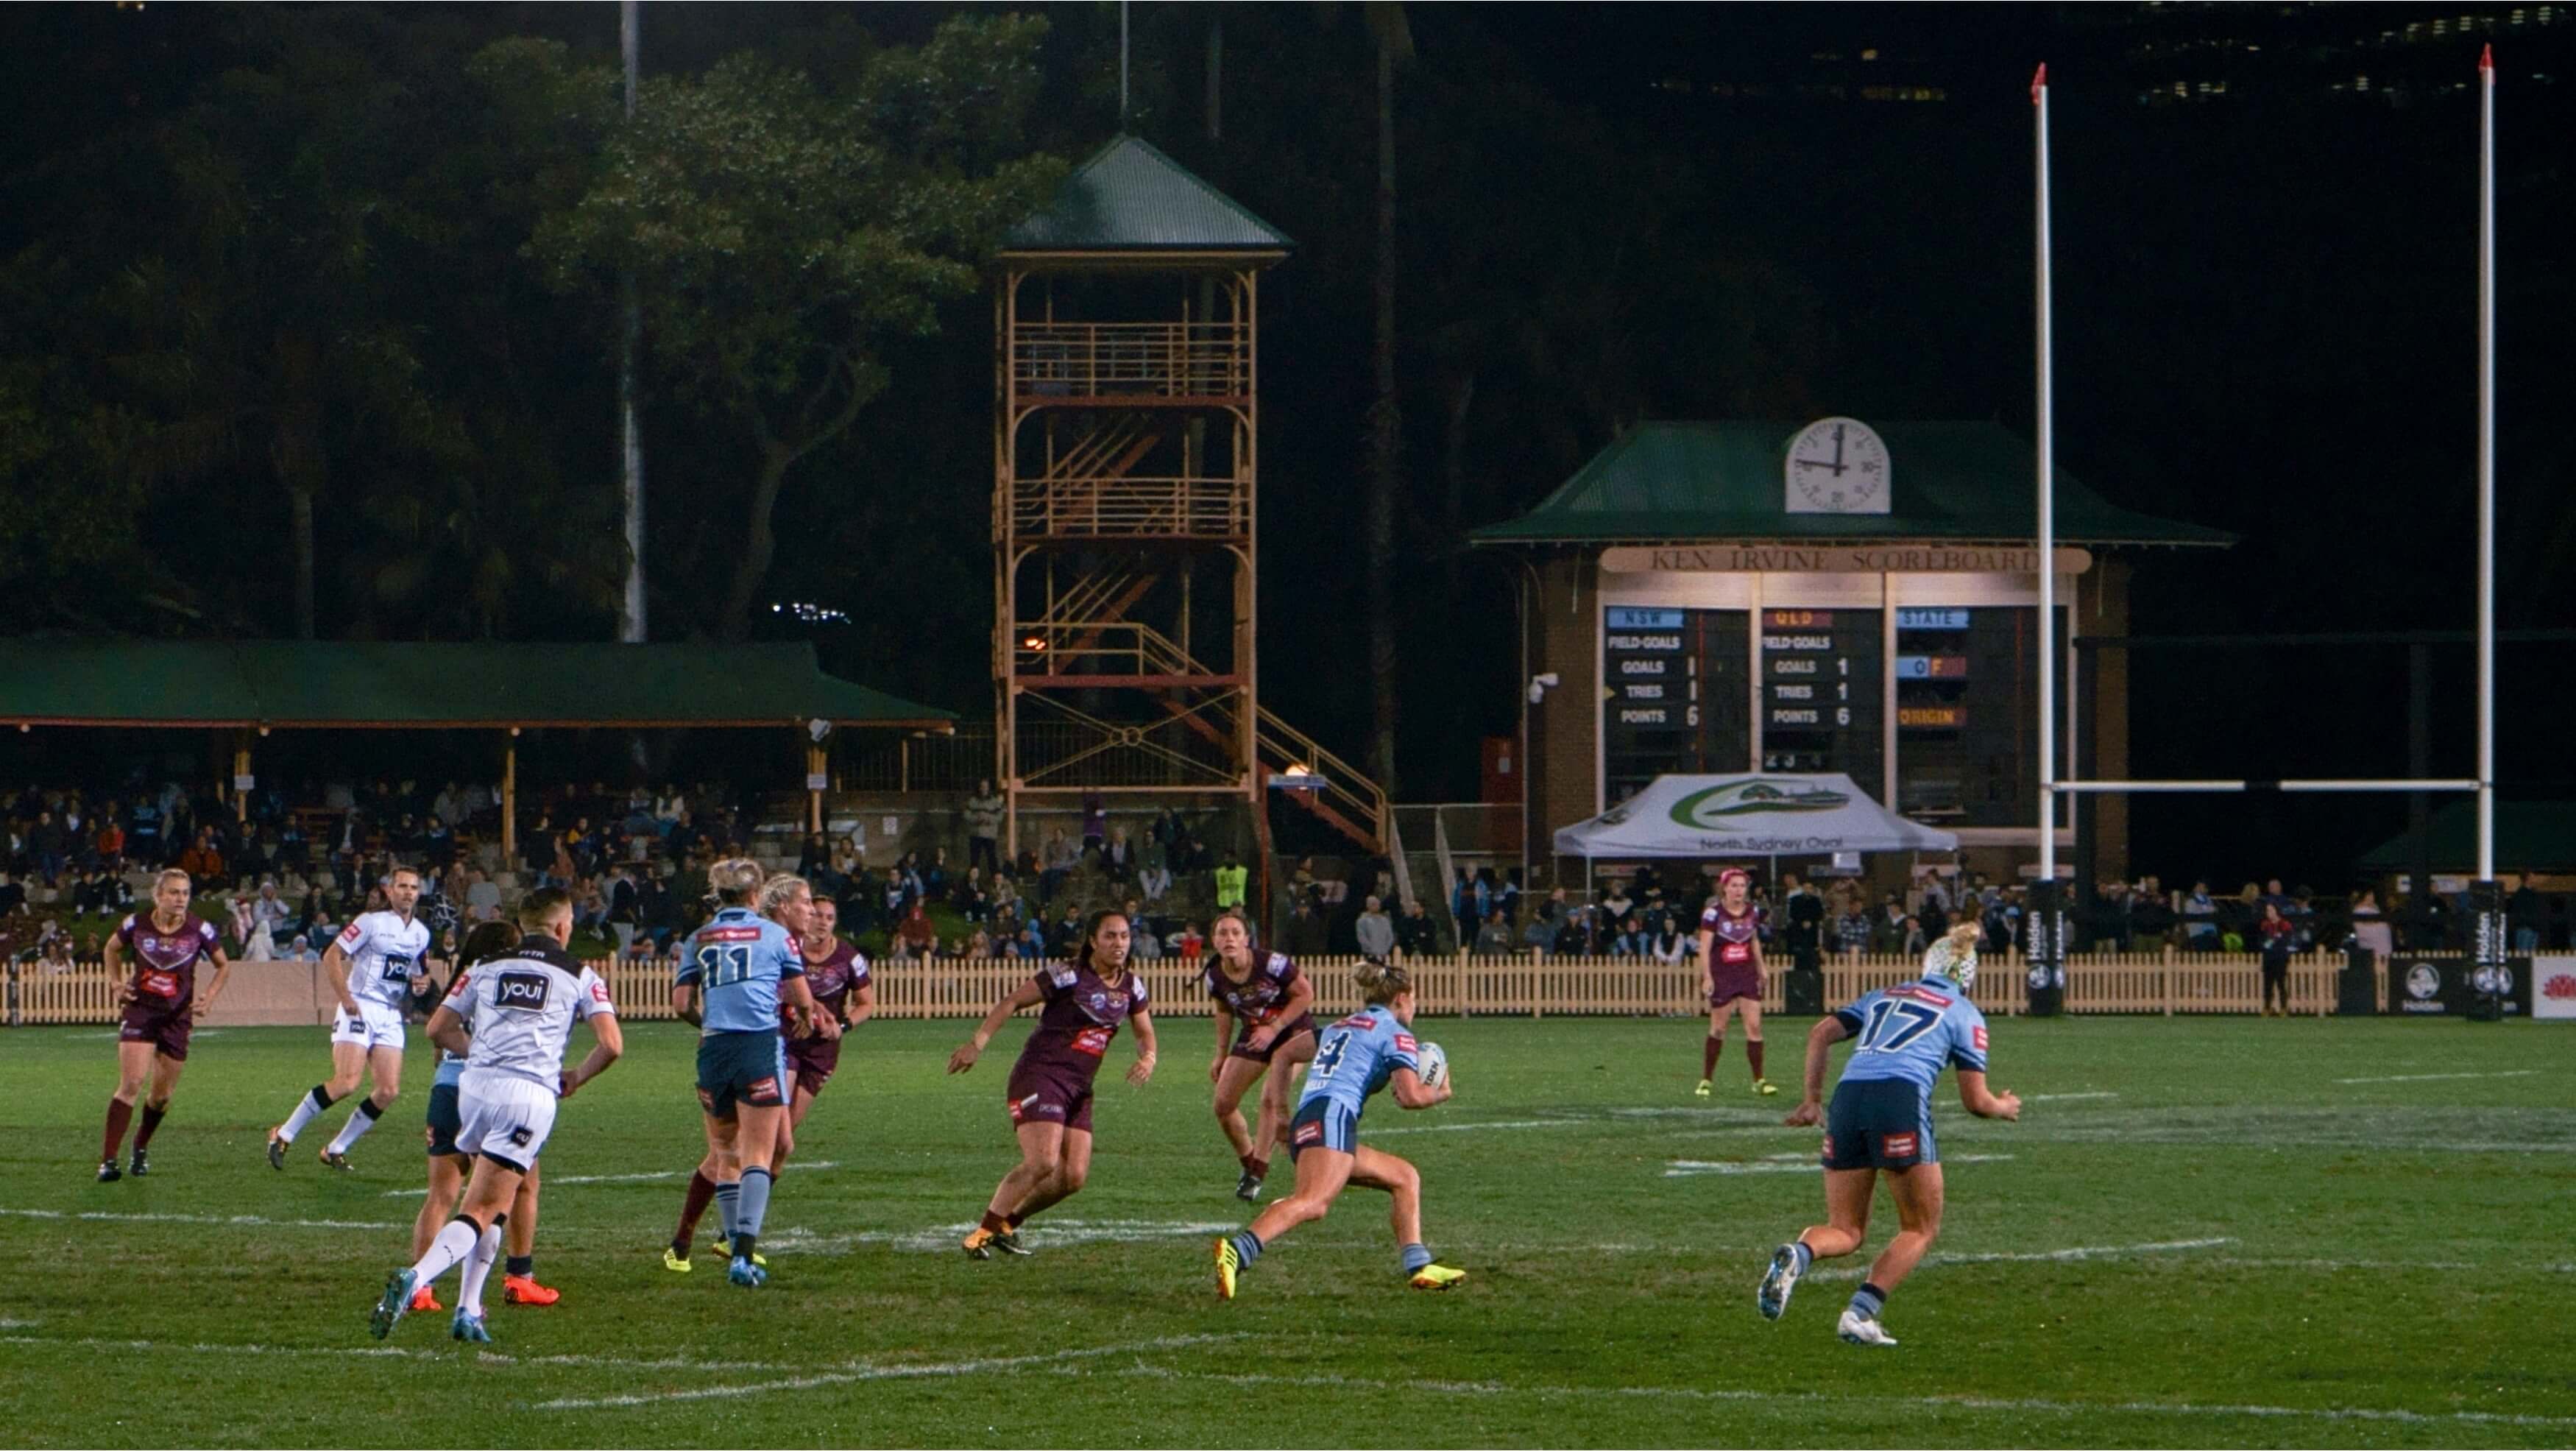 New South Wales player Isabelle Kelly moves the ball against Queensland in the first Women's State of Origin match - 22 June 2018, North Sydney Oval.